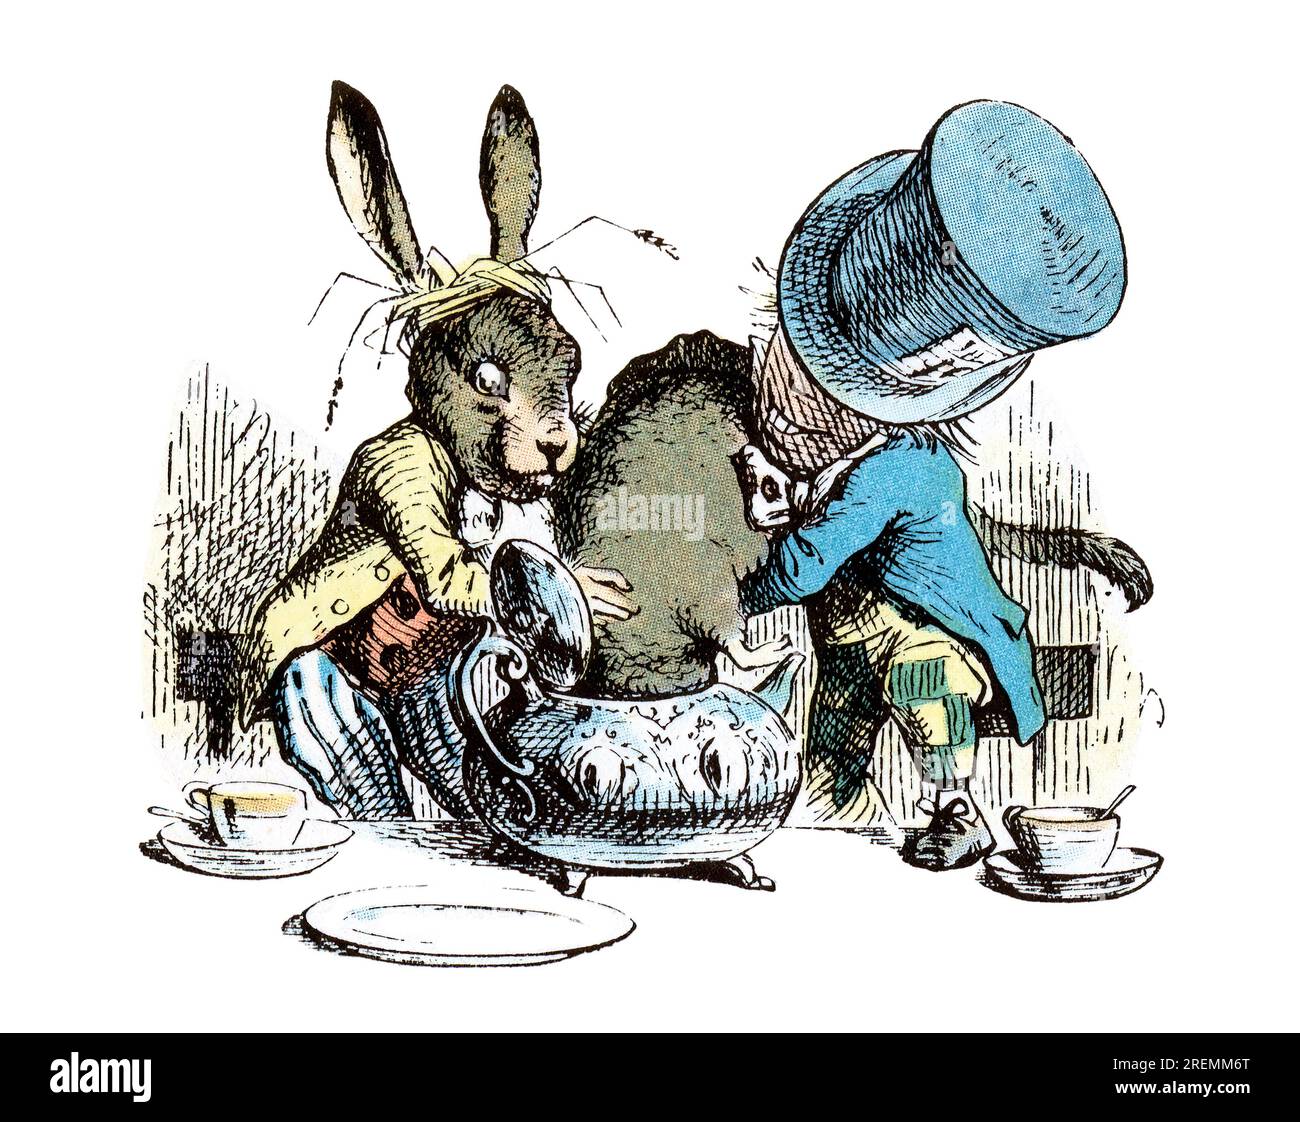 Mad Hatter march hare making tea Alice in Wonderland colored Tenniel illustration Stock Photo